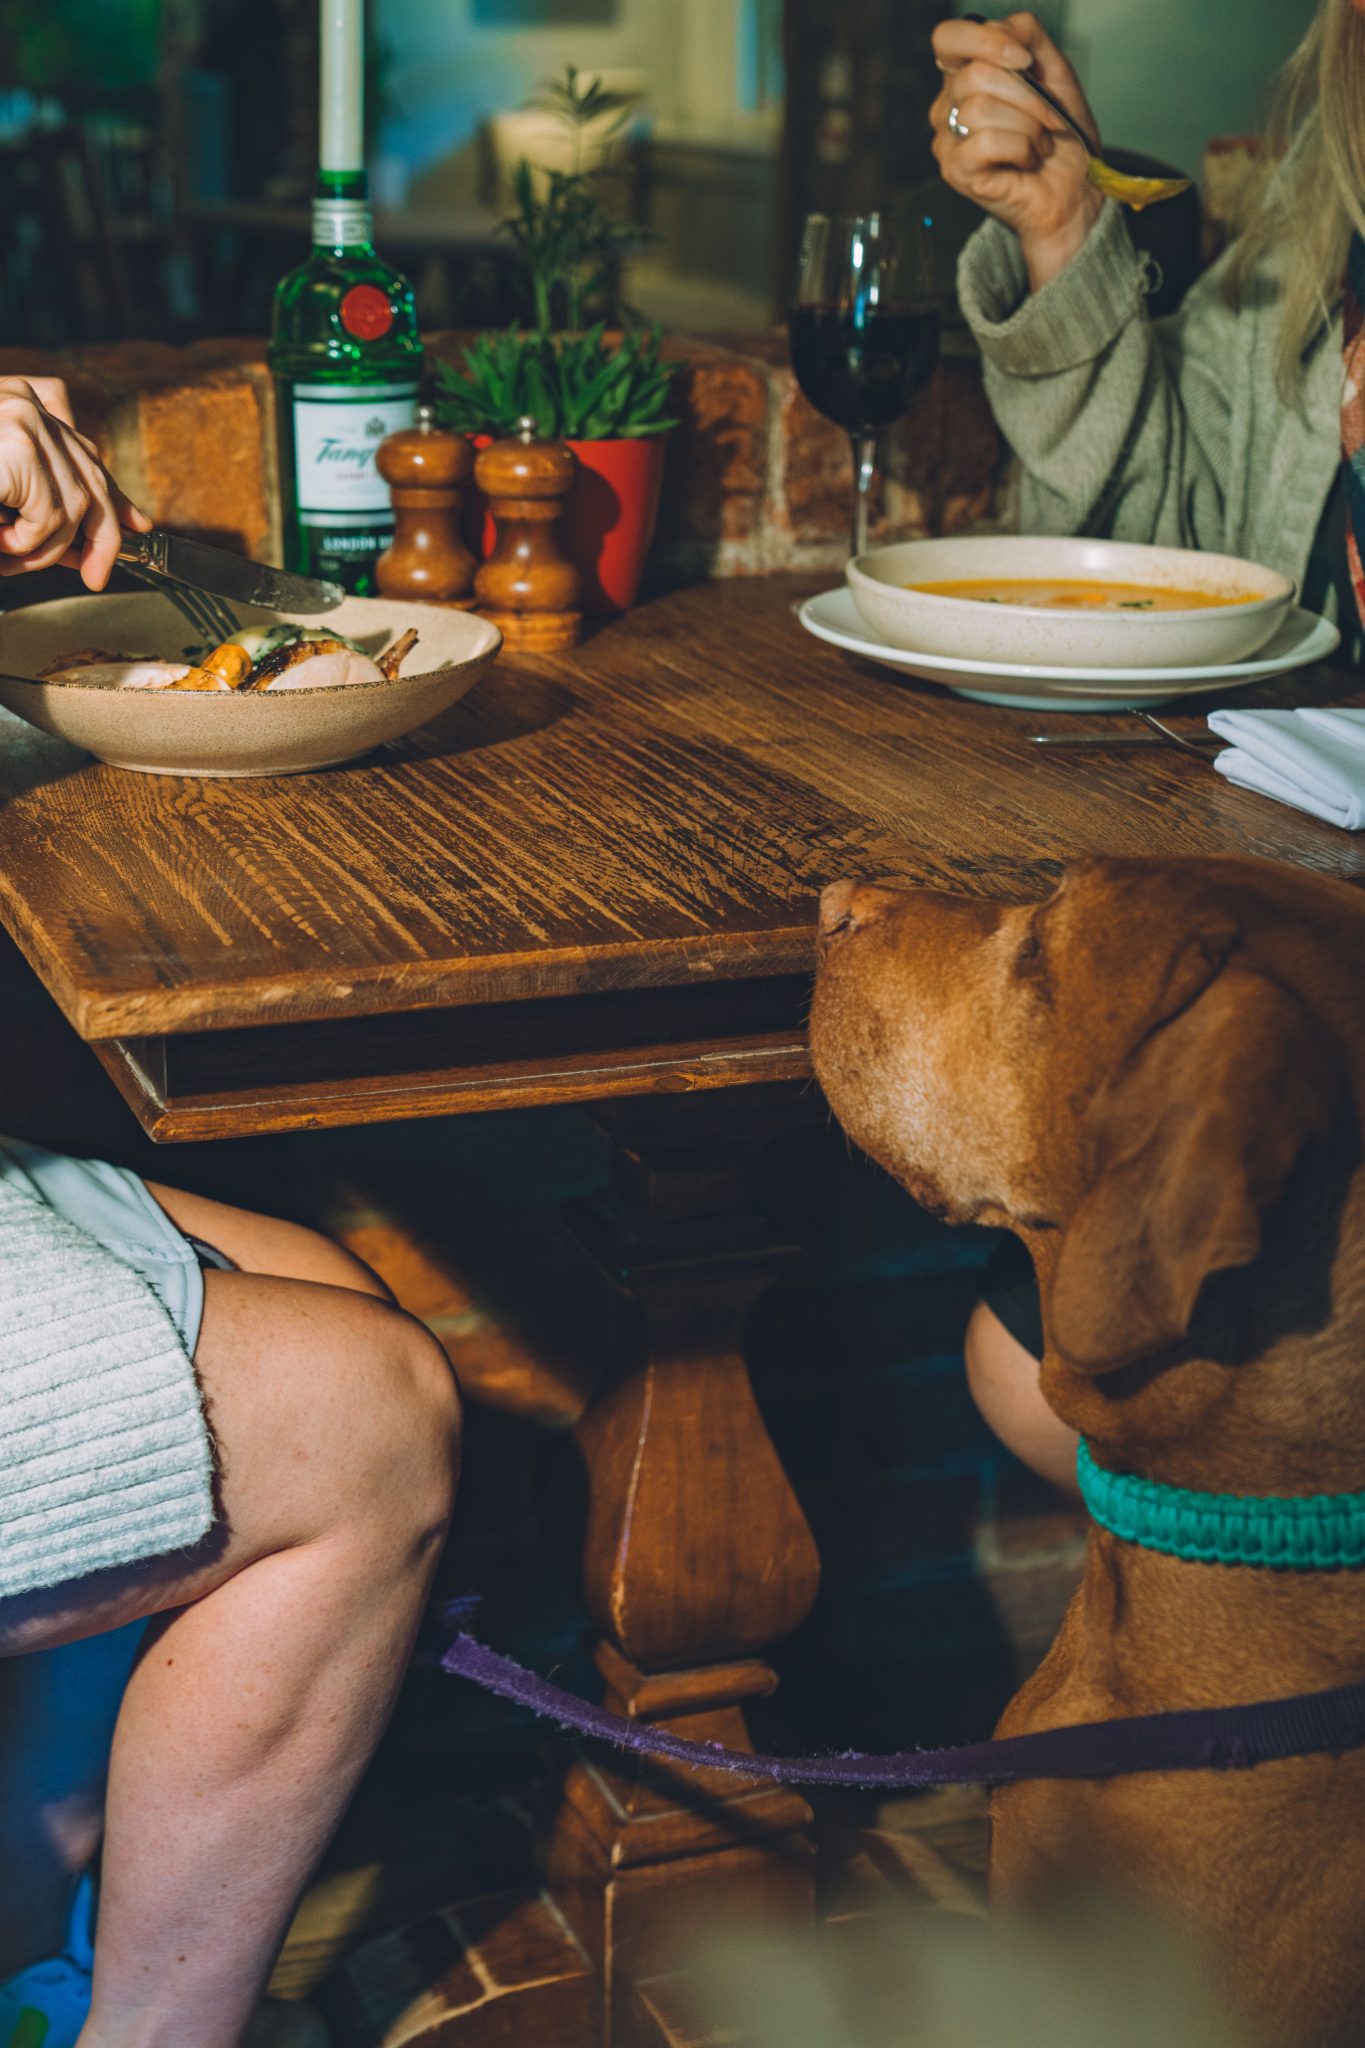 Commercial photo of eating food in a rustic pub